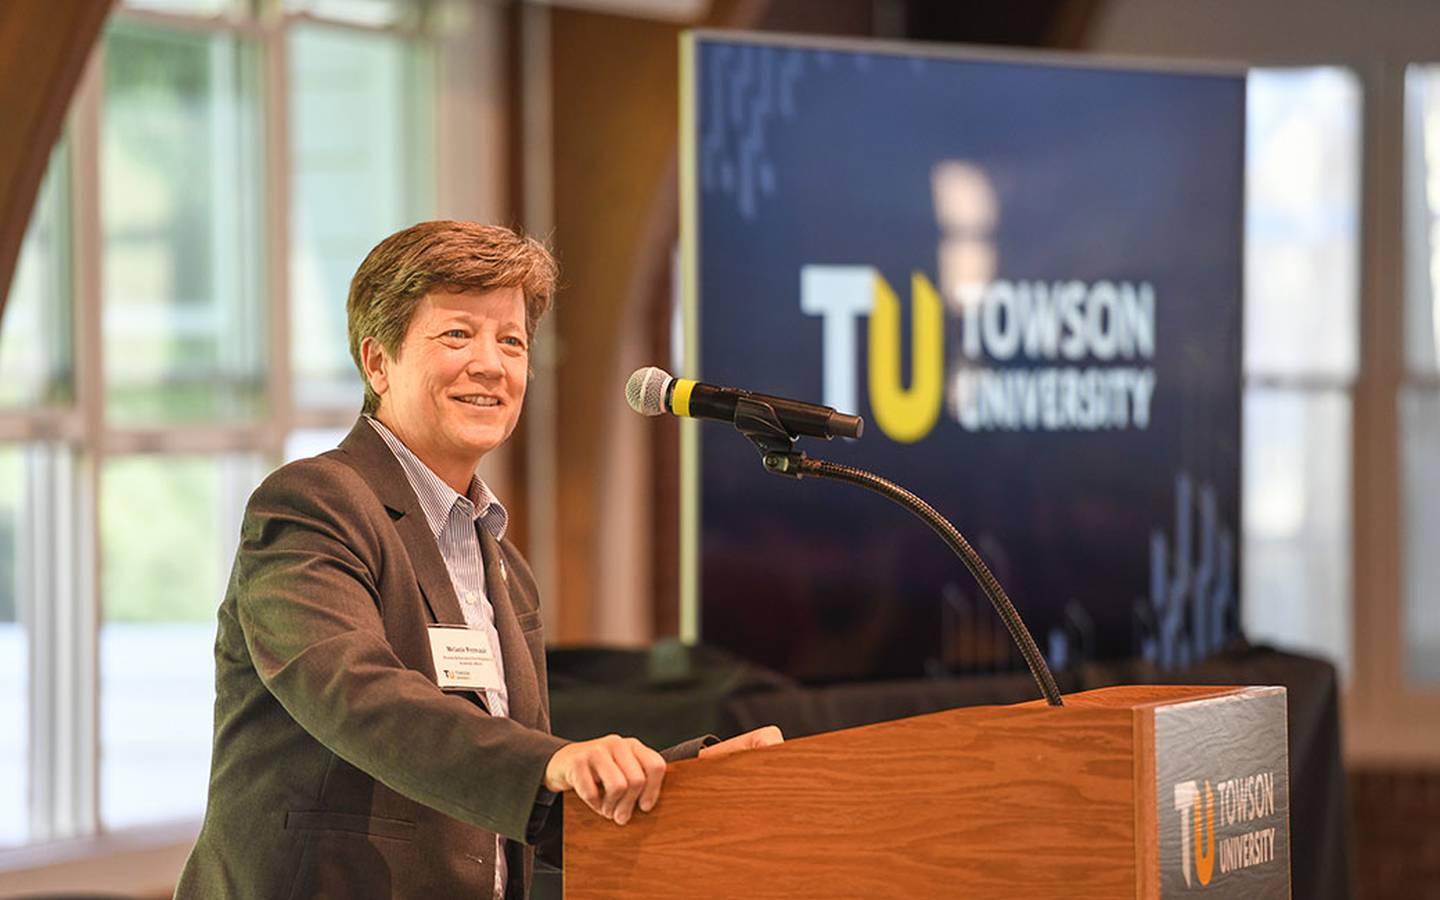 Melanie Perreault, Towson University's provost and executive vice president for academic and student affairs, was named interim president of Towson University.